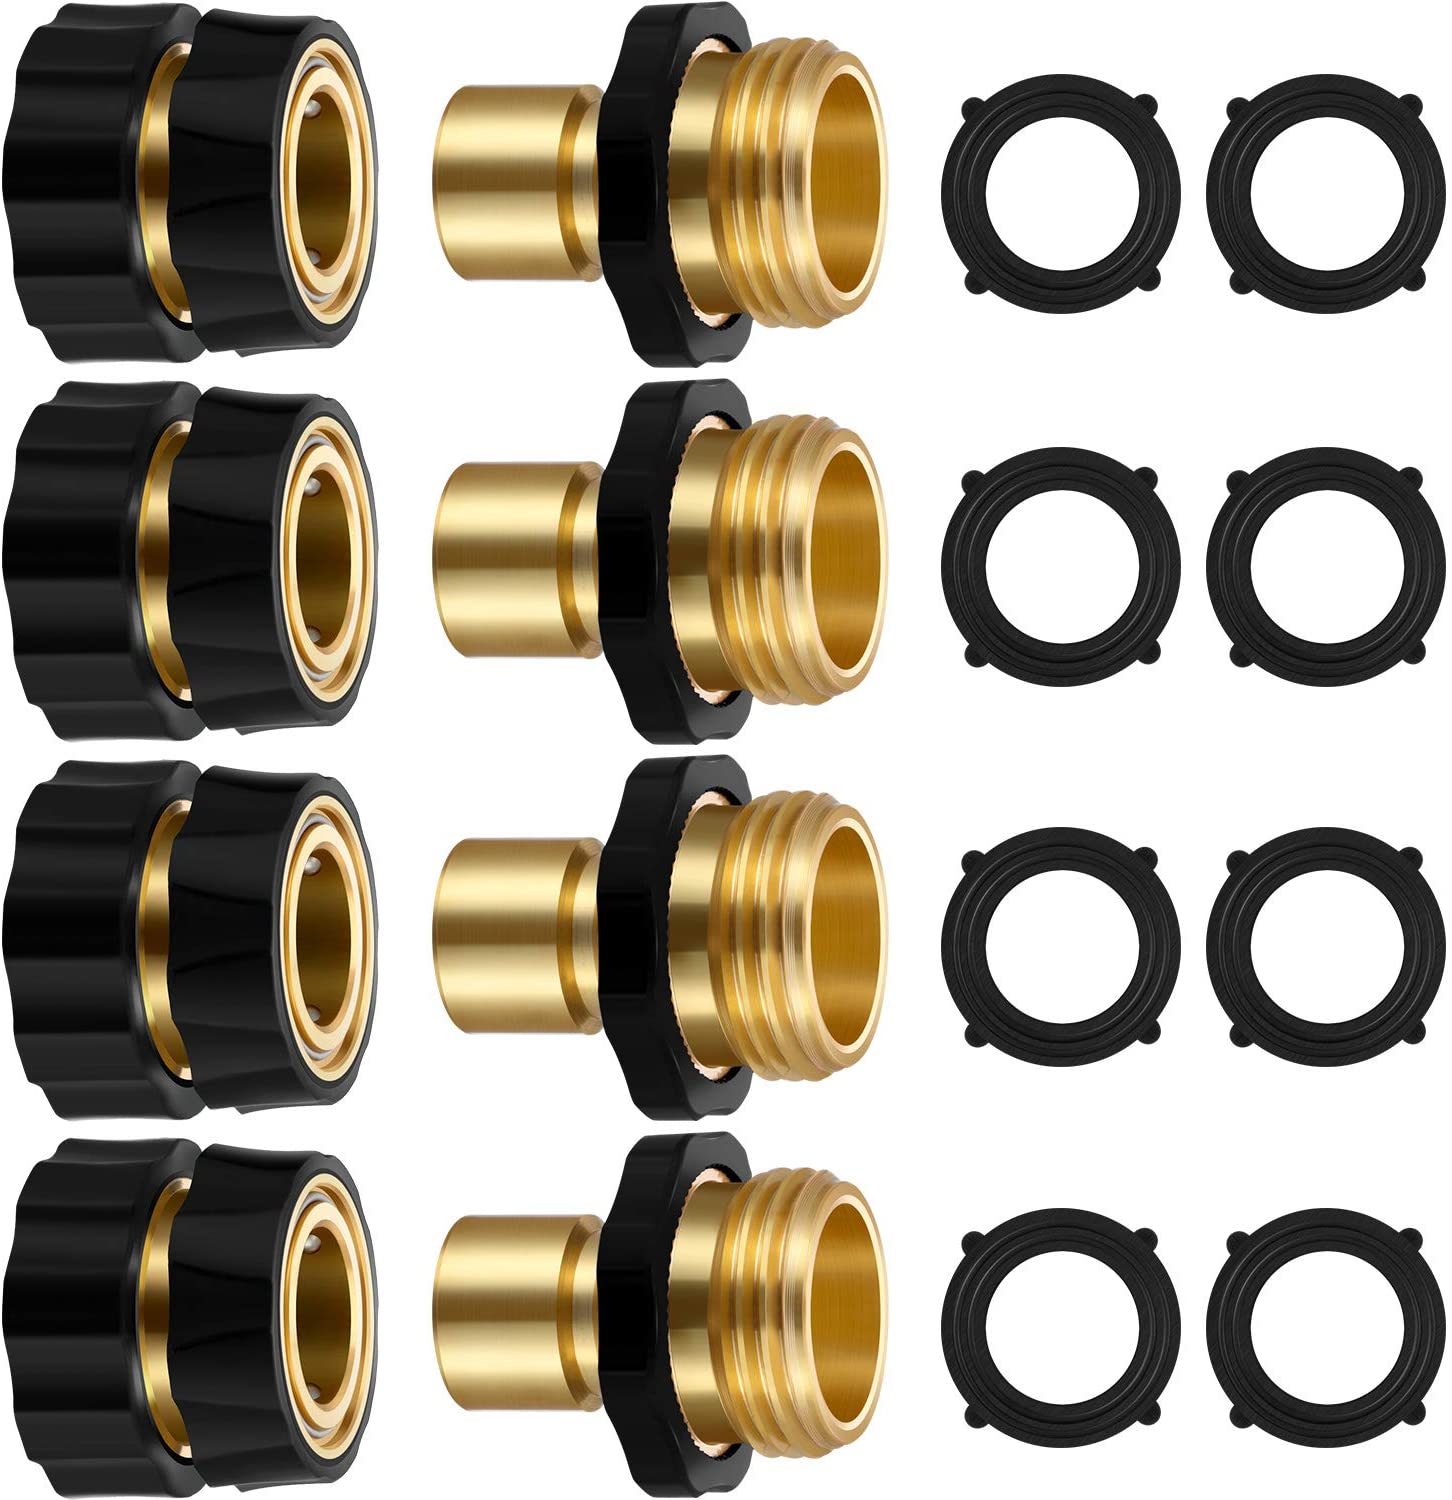 Maitys 4 Sets 3/4 Inch Garden Hose Fitting Quick Connector and 12 Pieces Faucet Rubber Gasket (4 Sets)